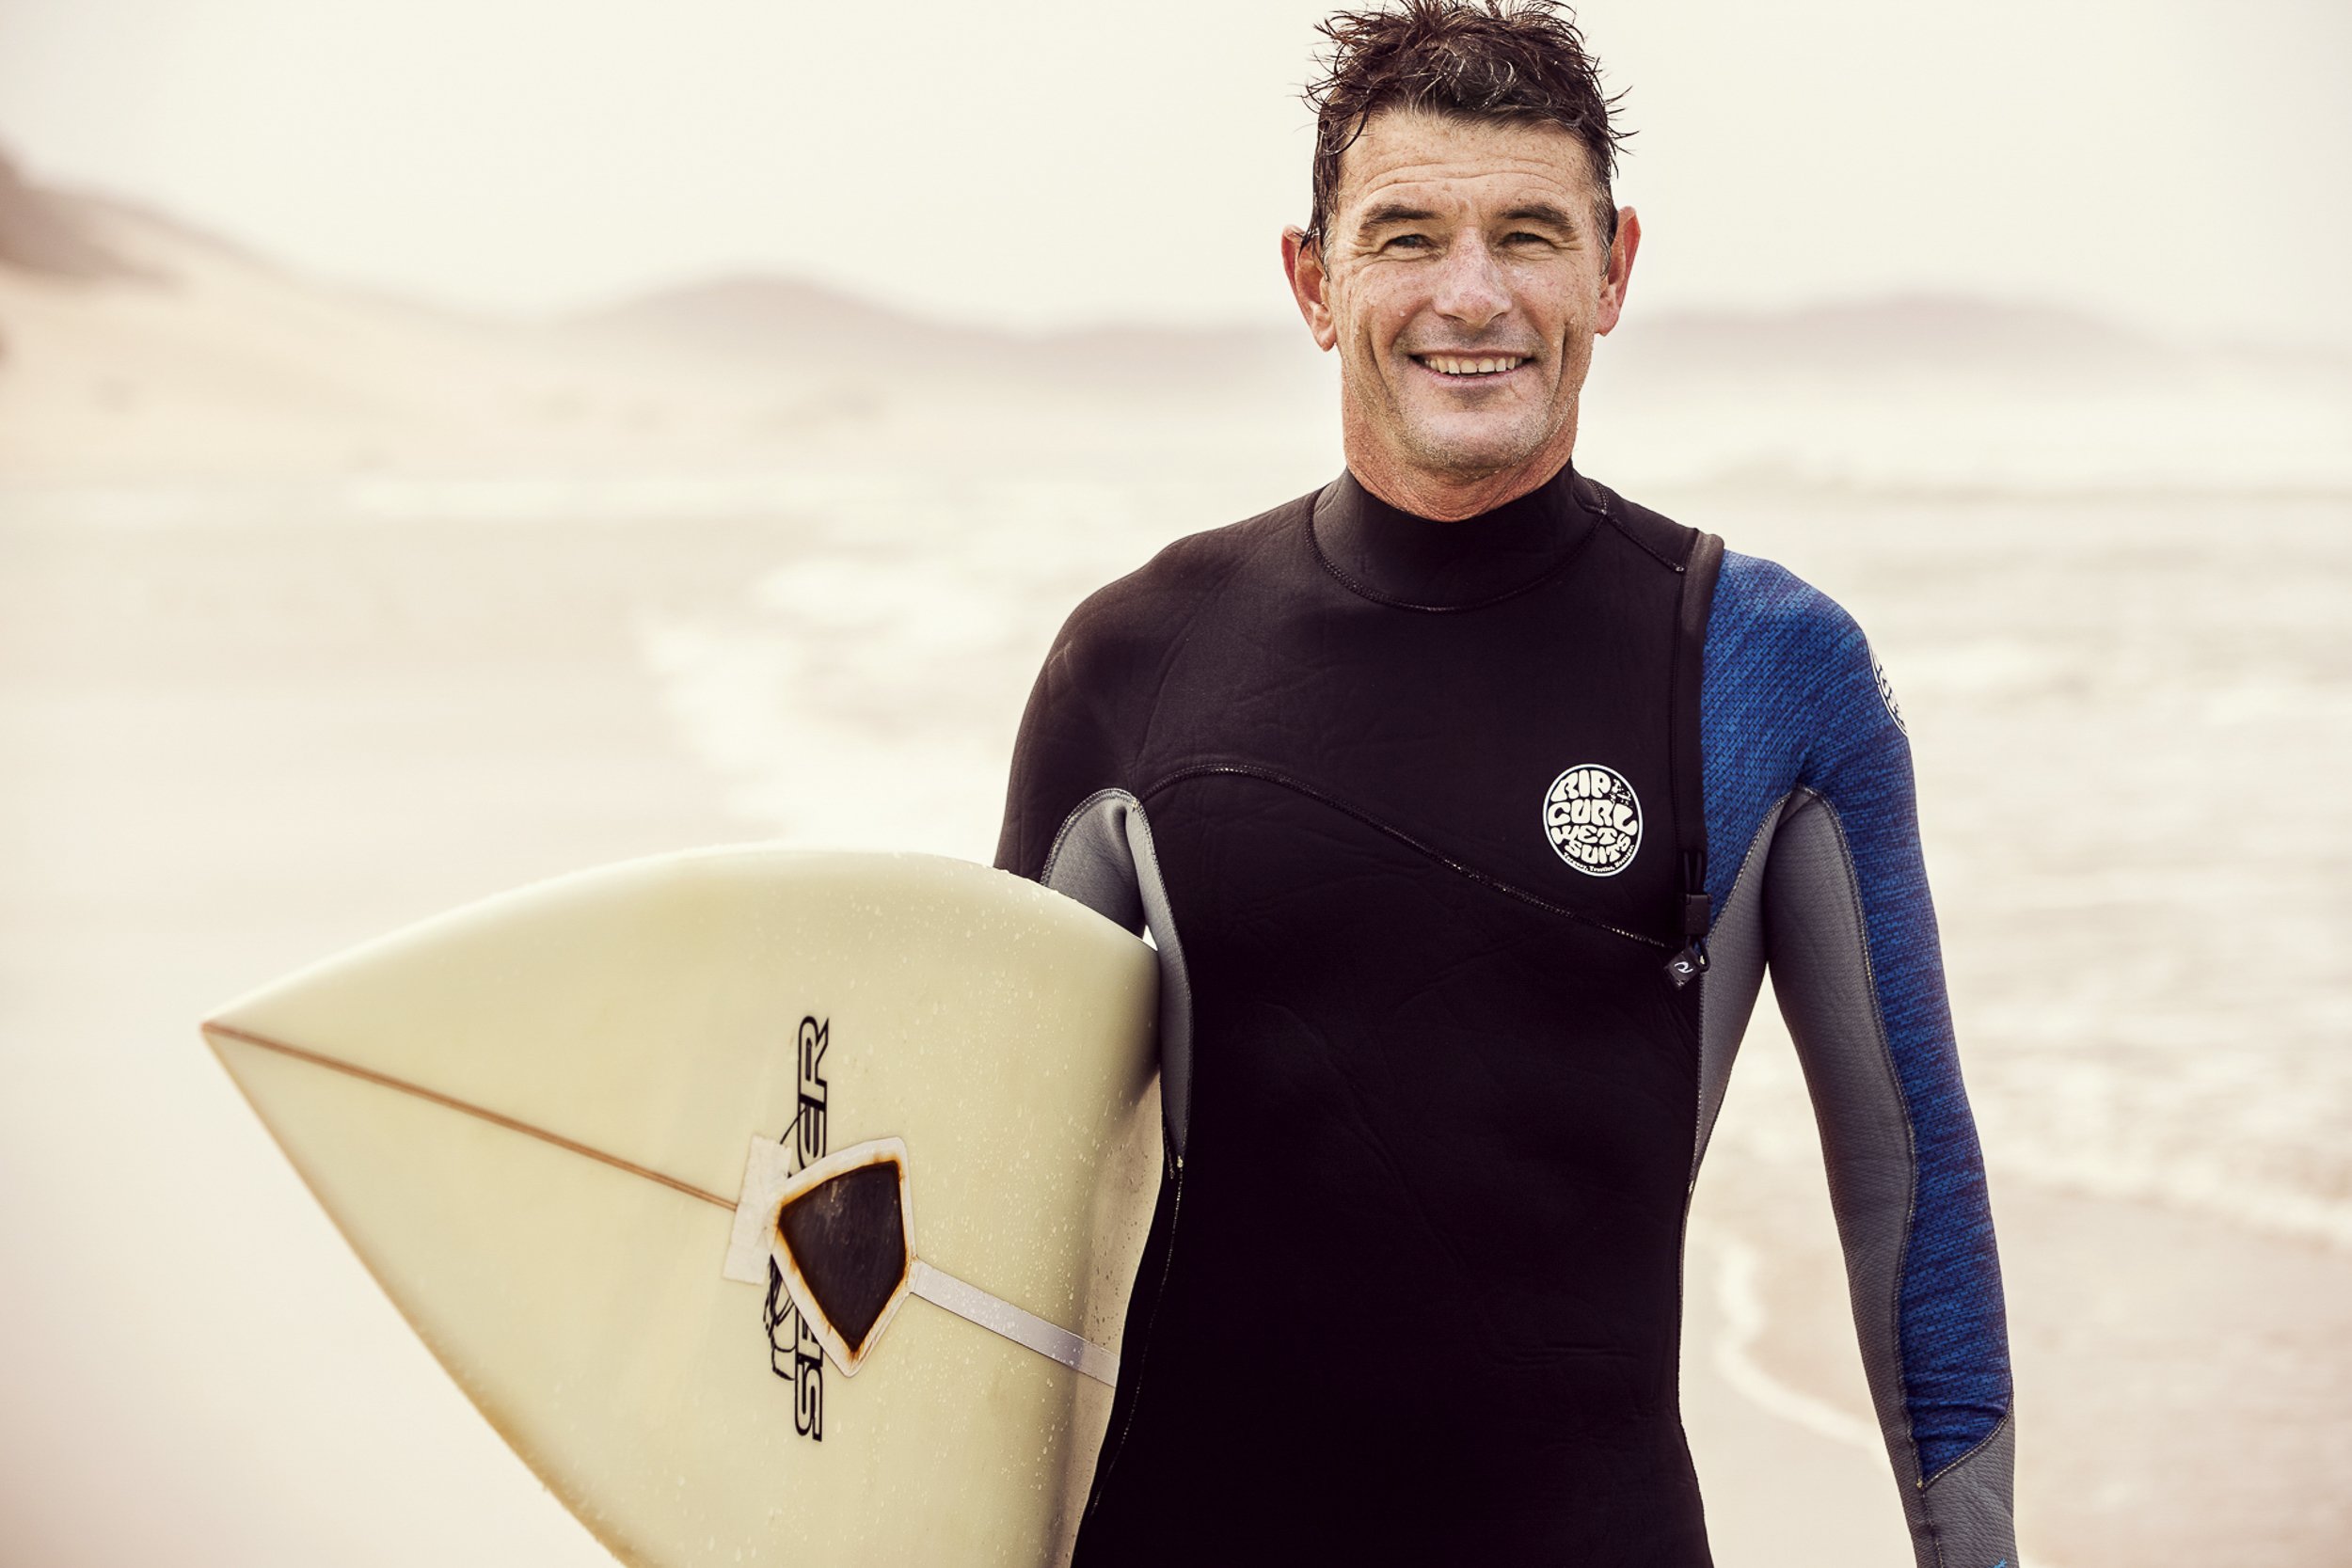 Lifestyle portrait of middle-aged man with surf board